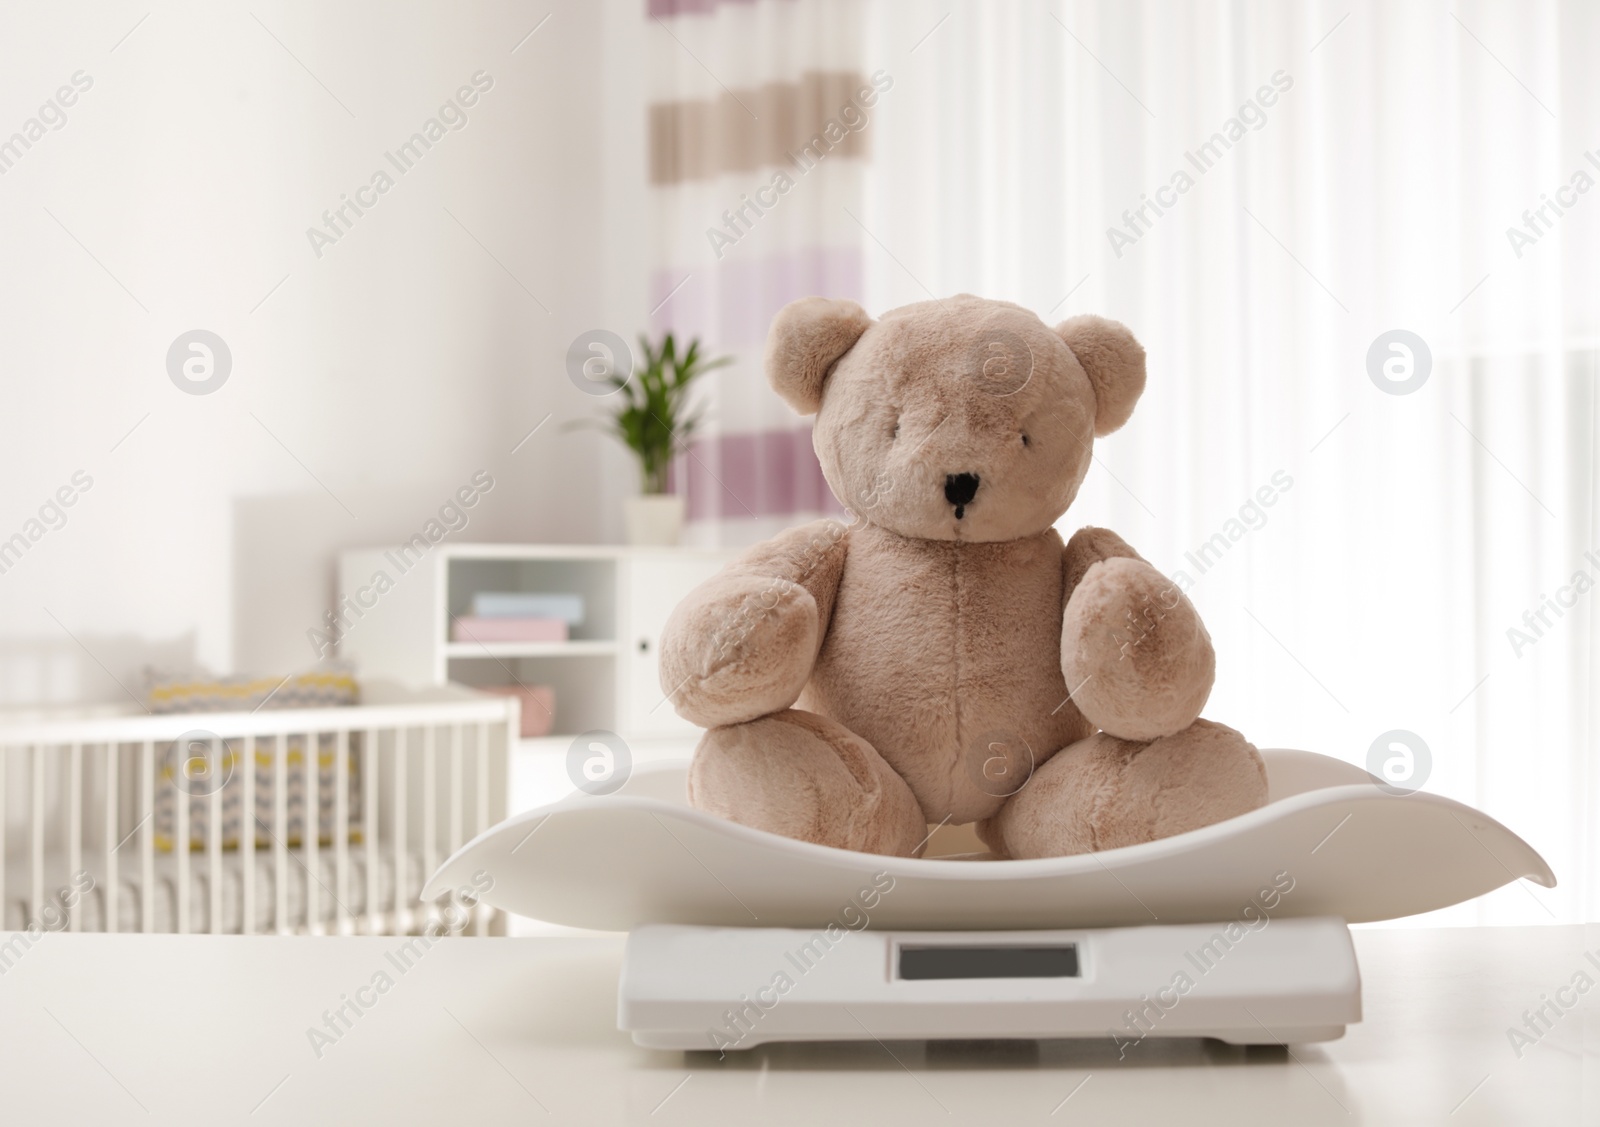 Photo of Baby scales with teddy bear on table indoors, space for text